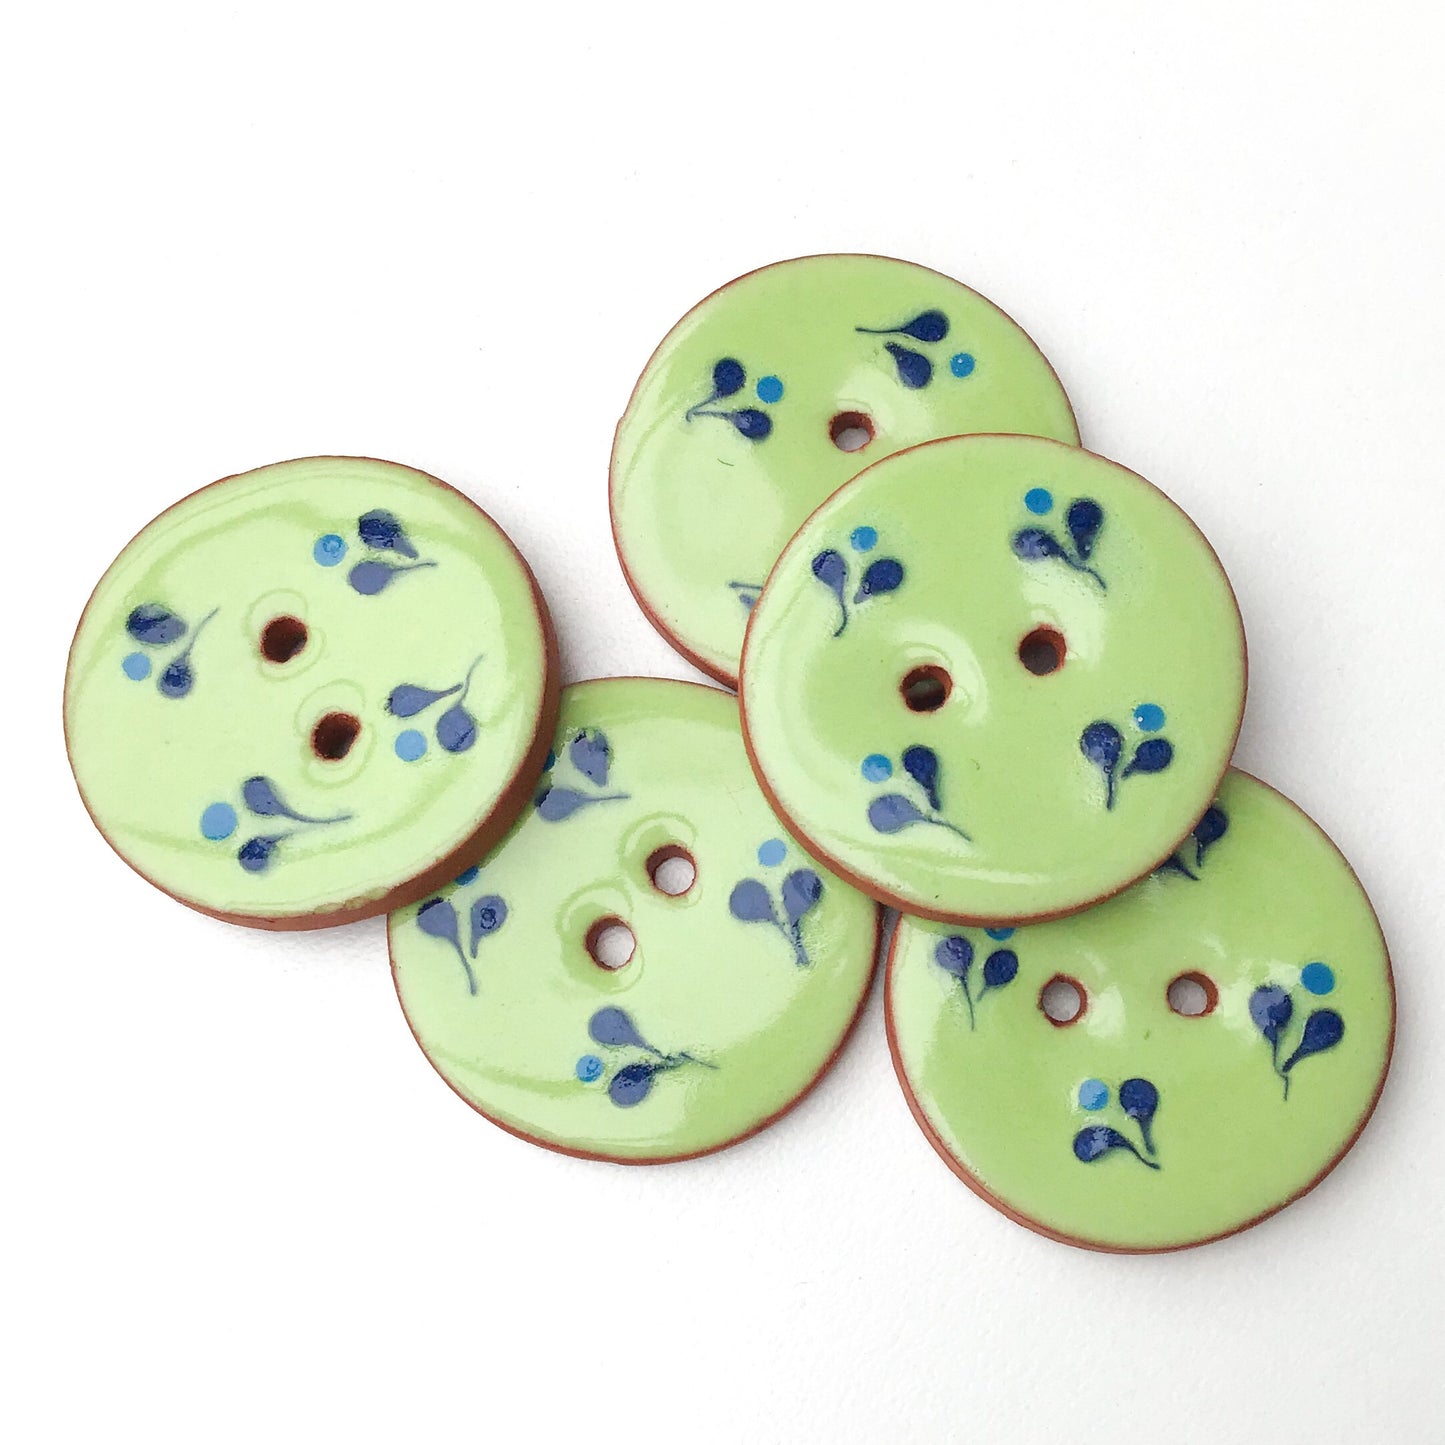 Decorative Ceramic Button with Small Floral Print - Green - Blue Clay Buttons - 1 1/16" (ws-65)